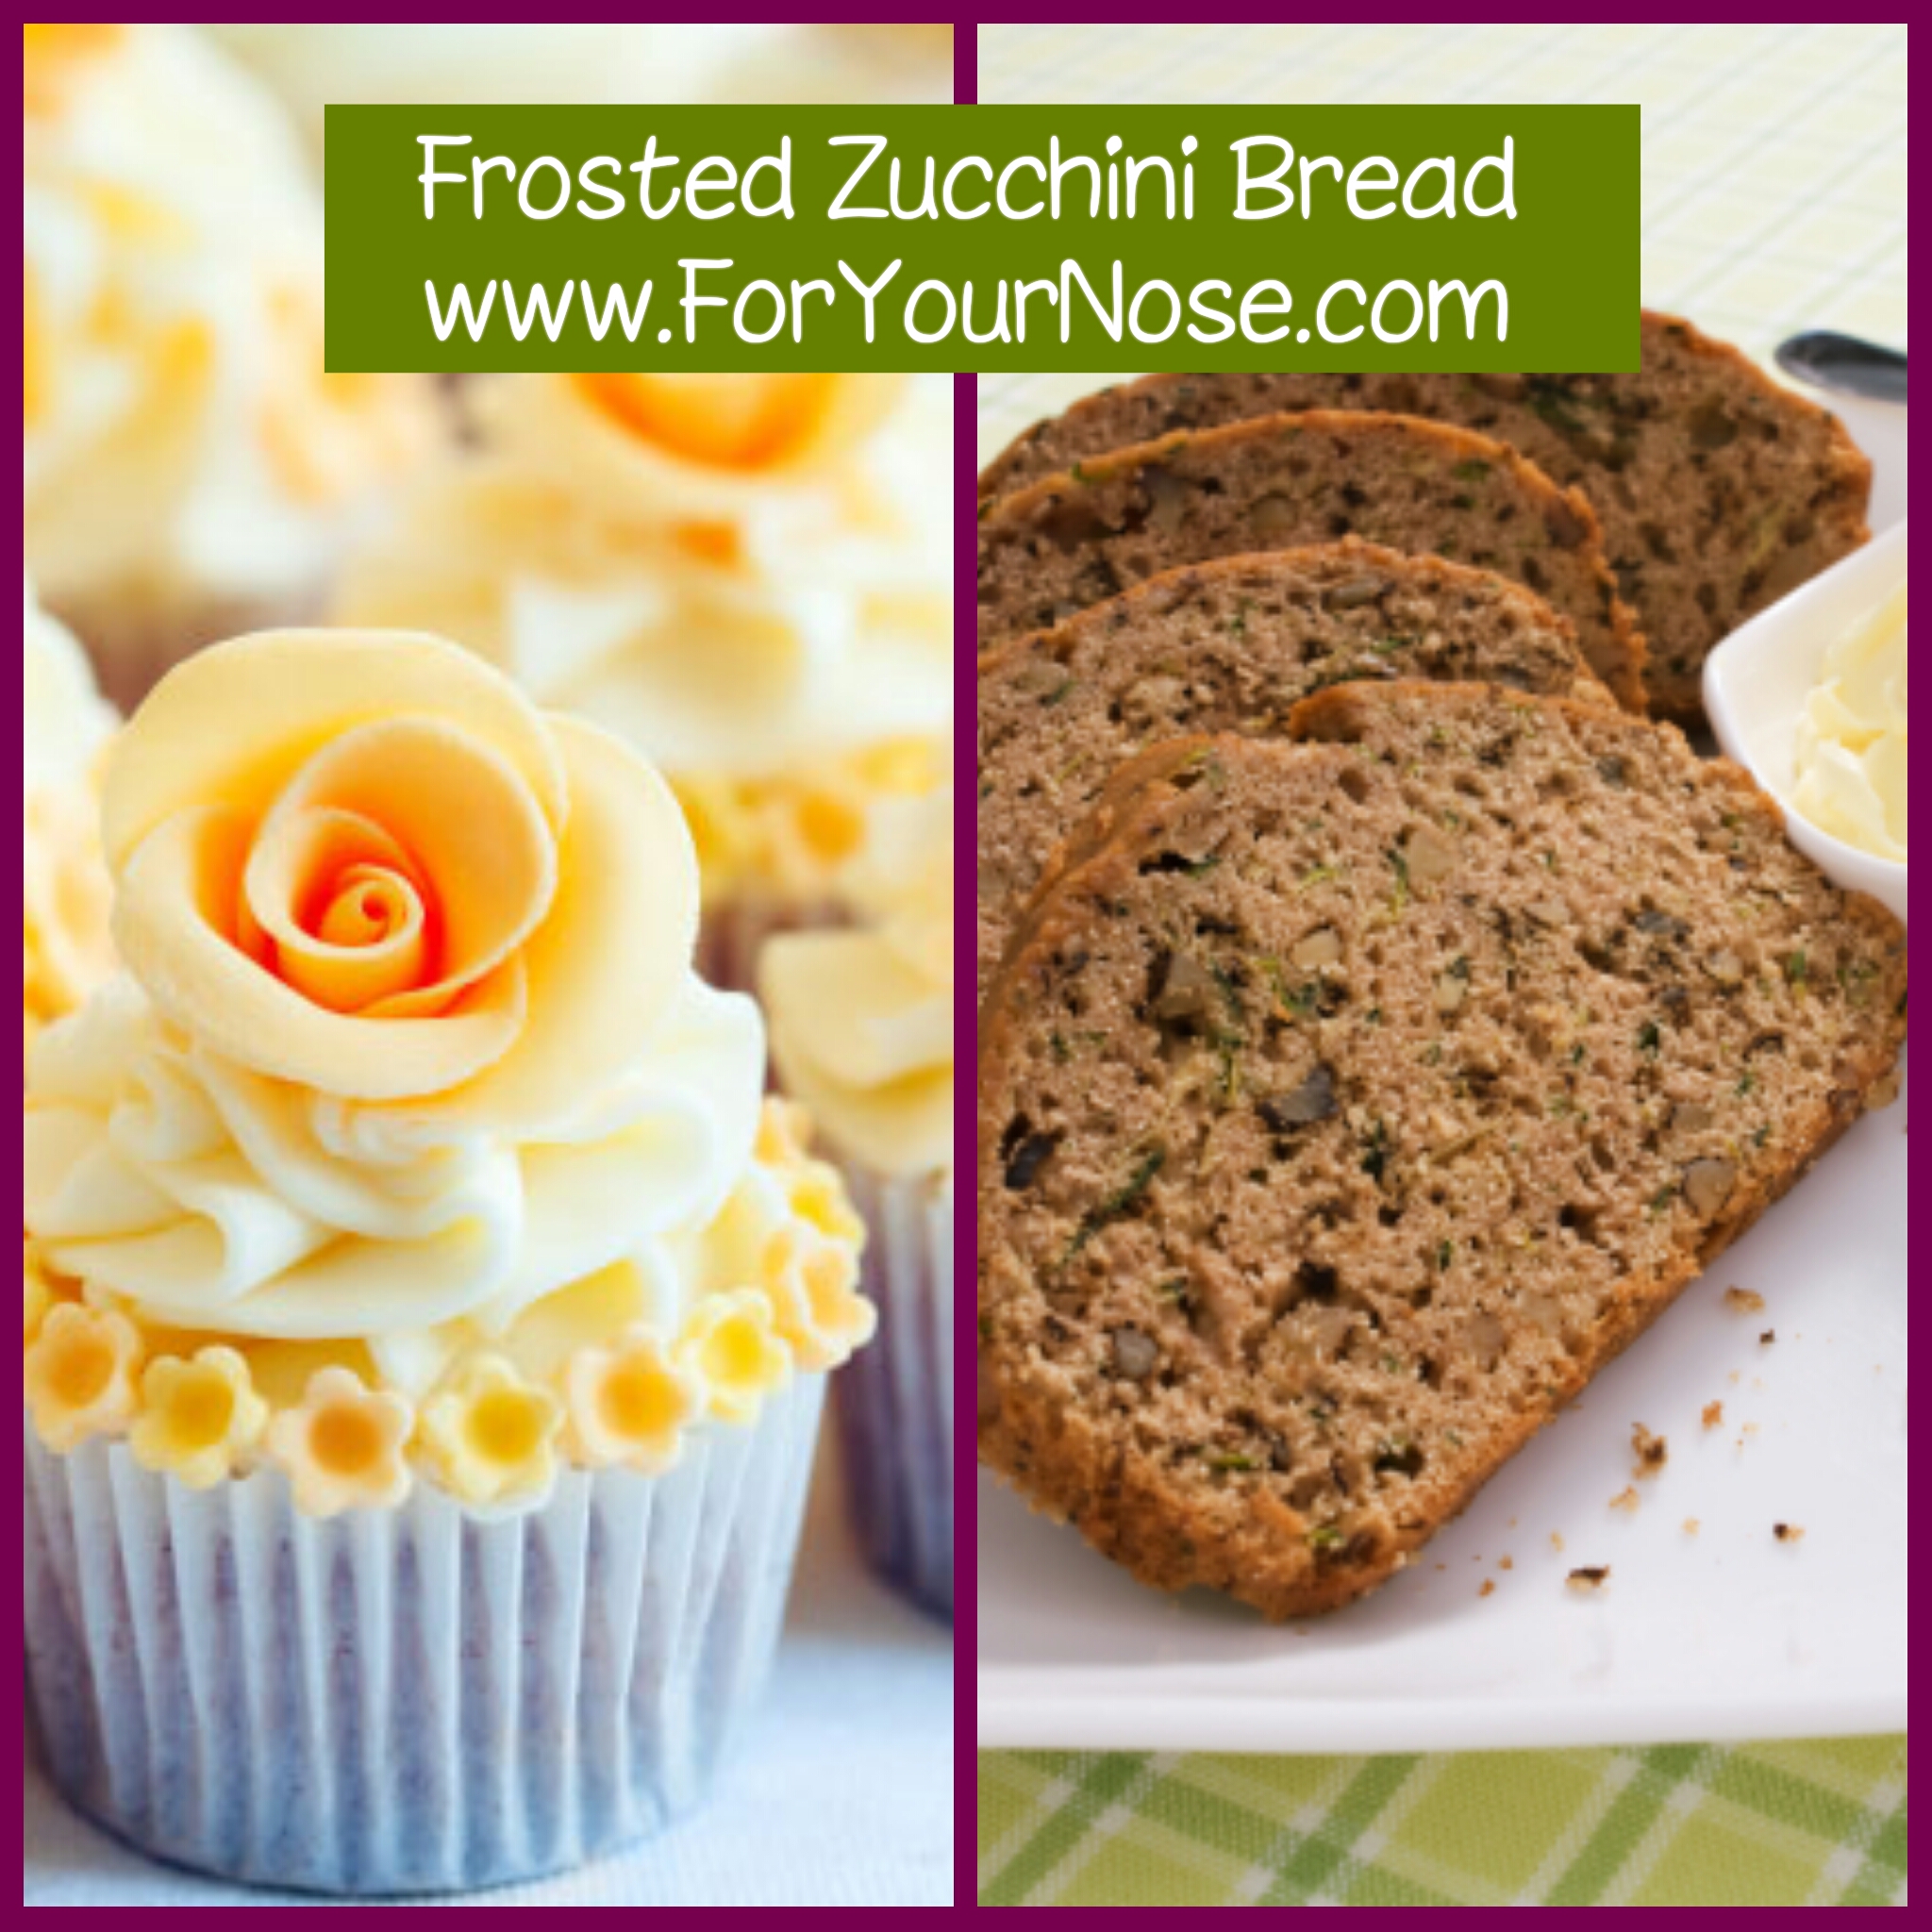 Frosted Zucchini Bread fragrance